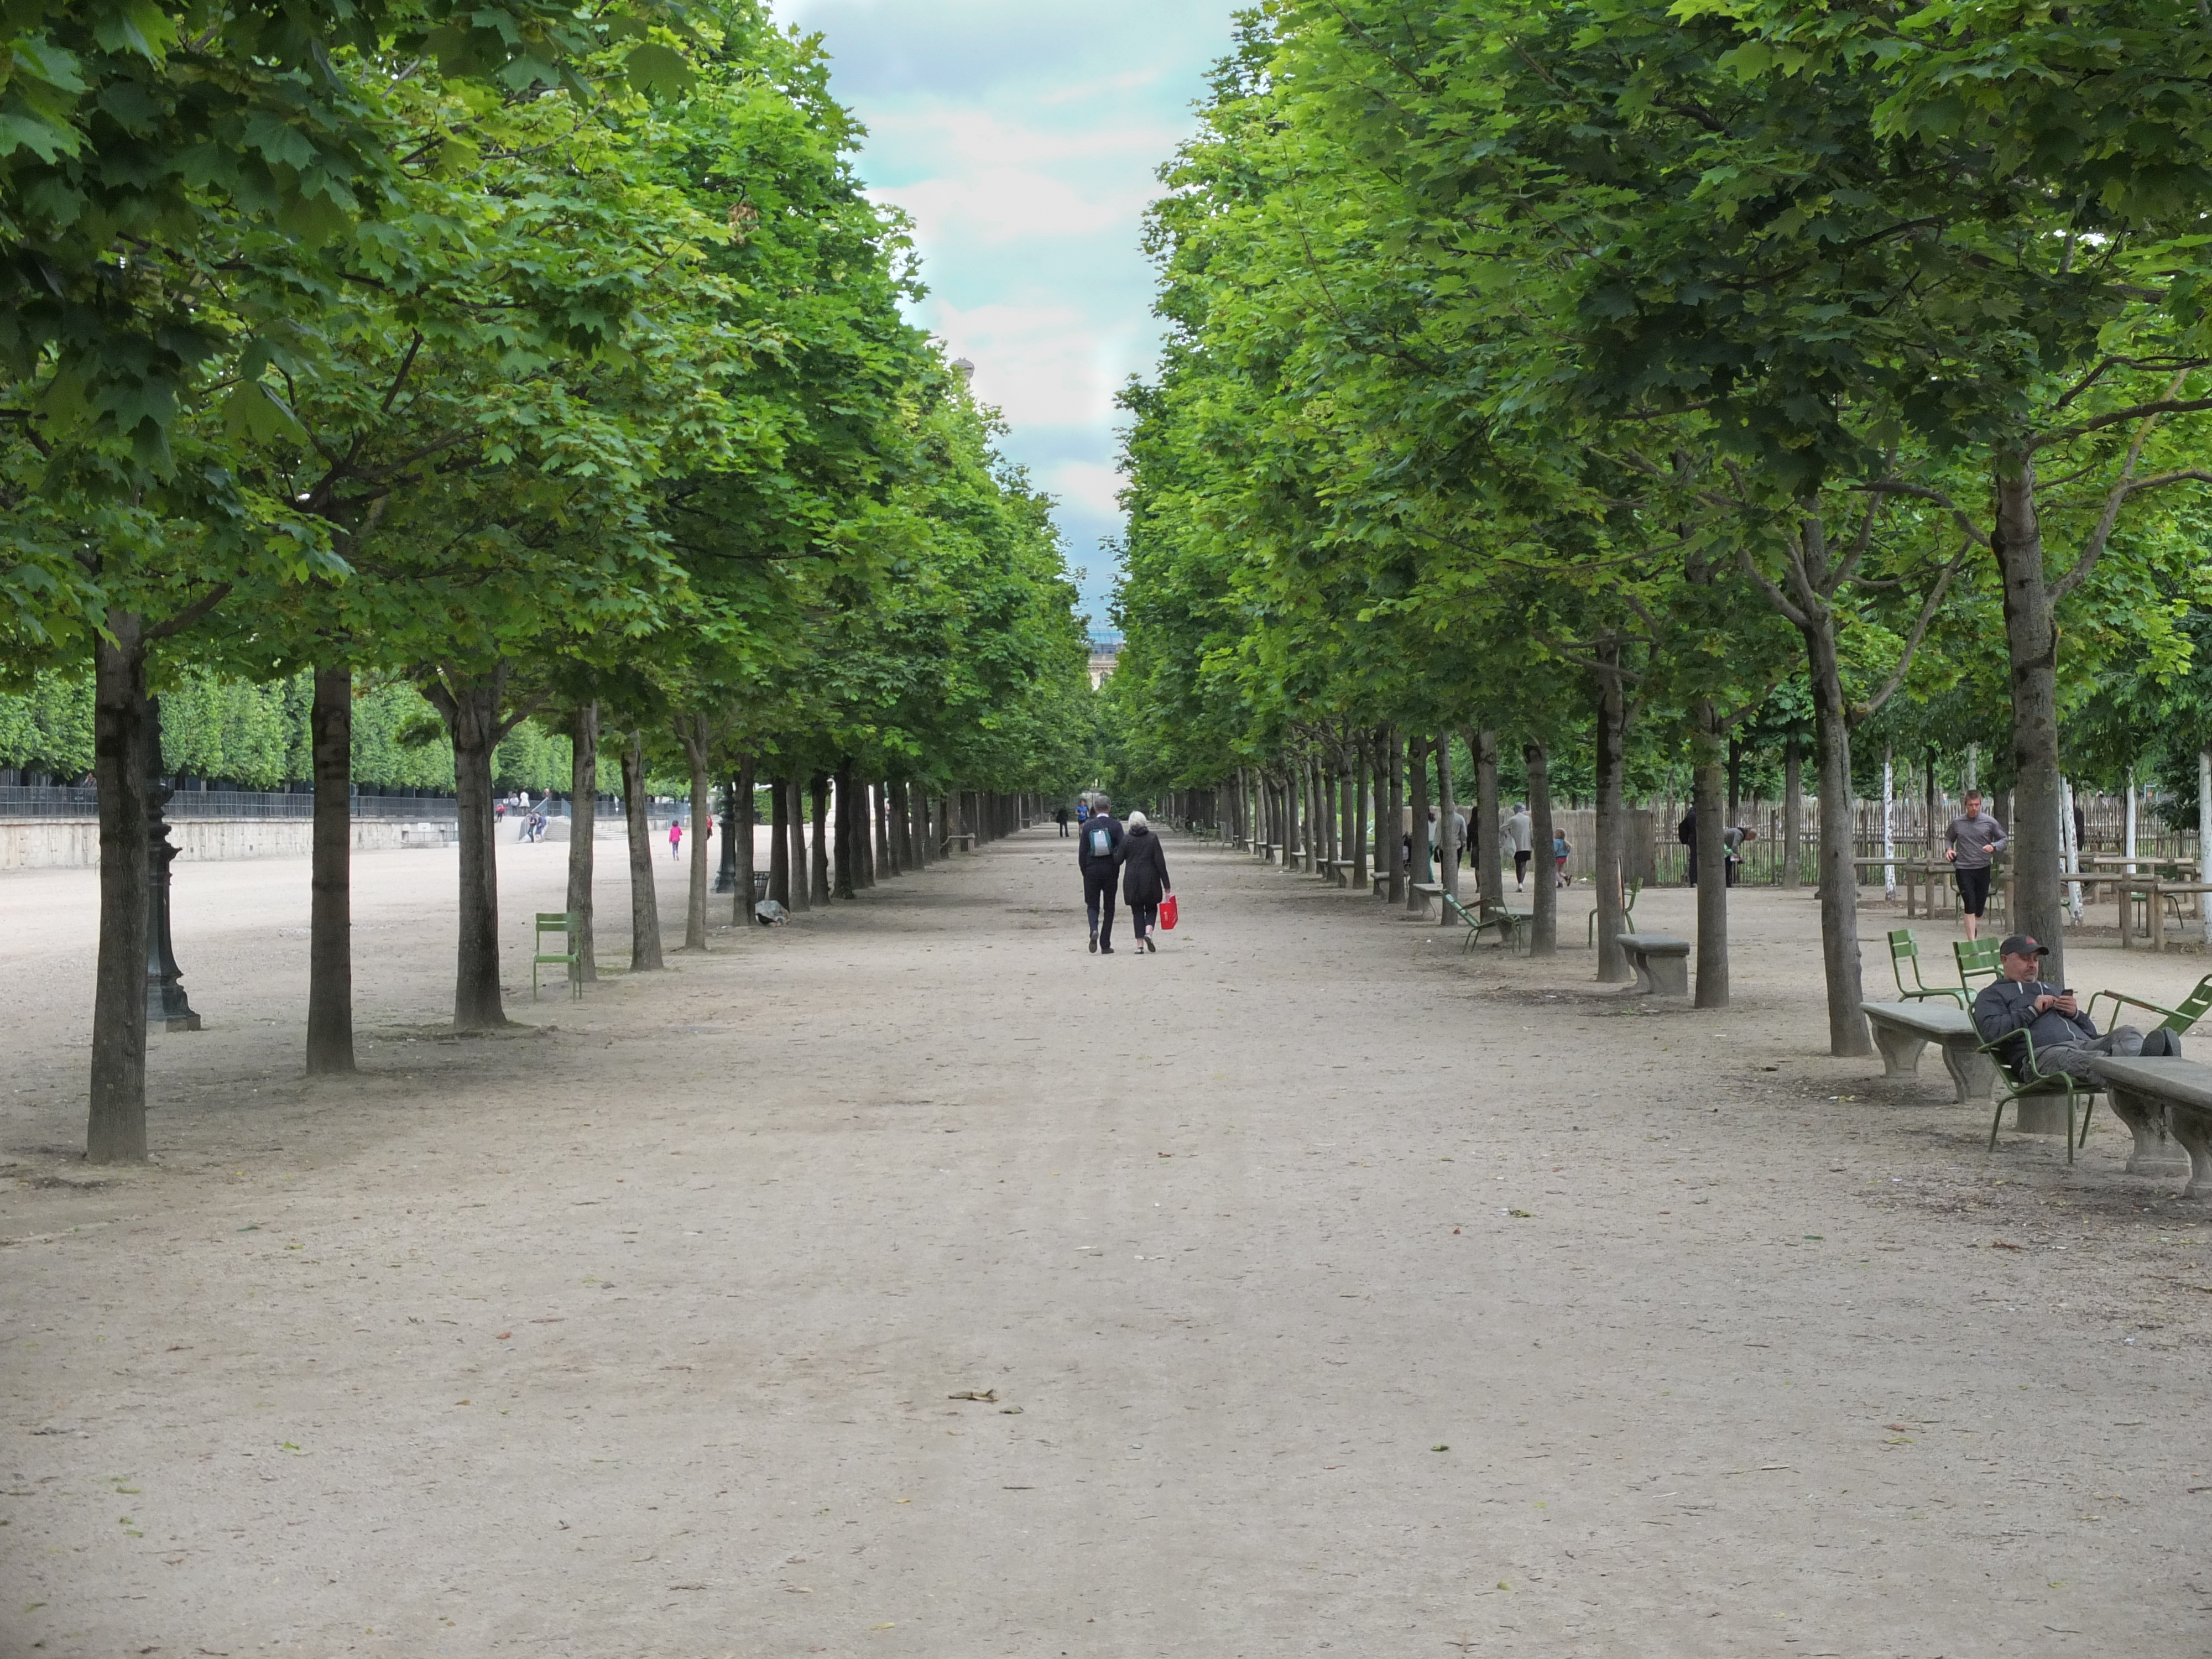 people walking on a path with trees